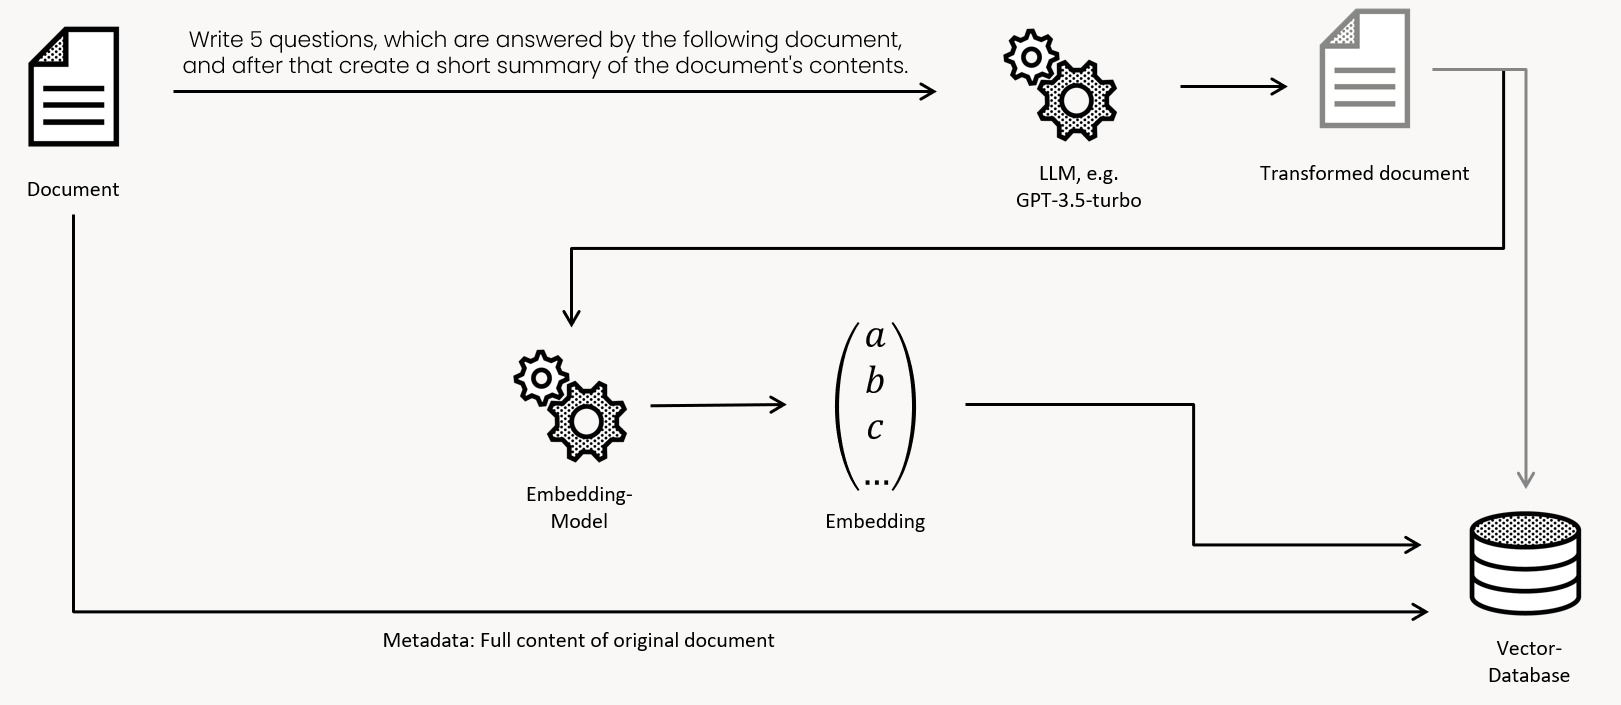 Embedding questions about the document instead of the actual document